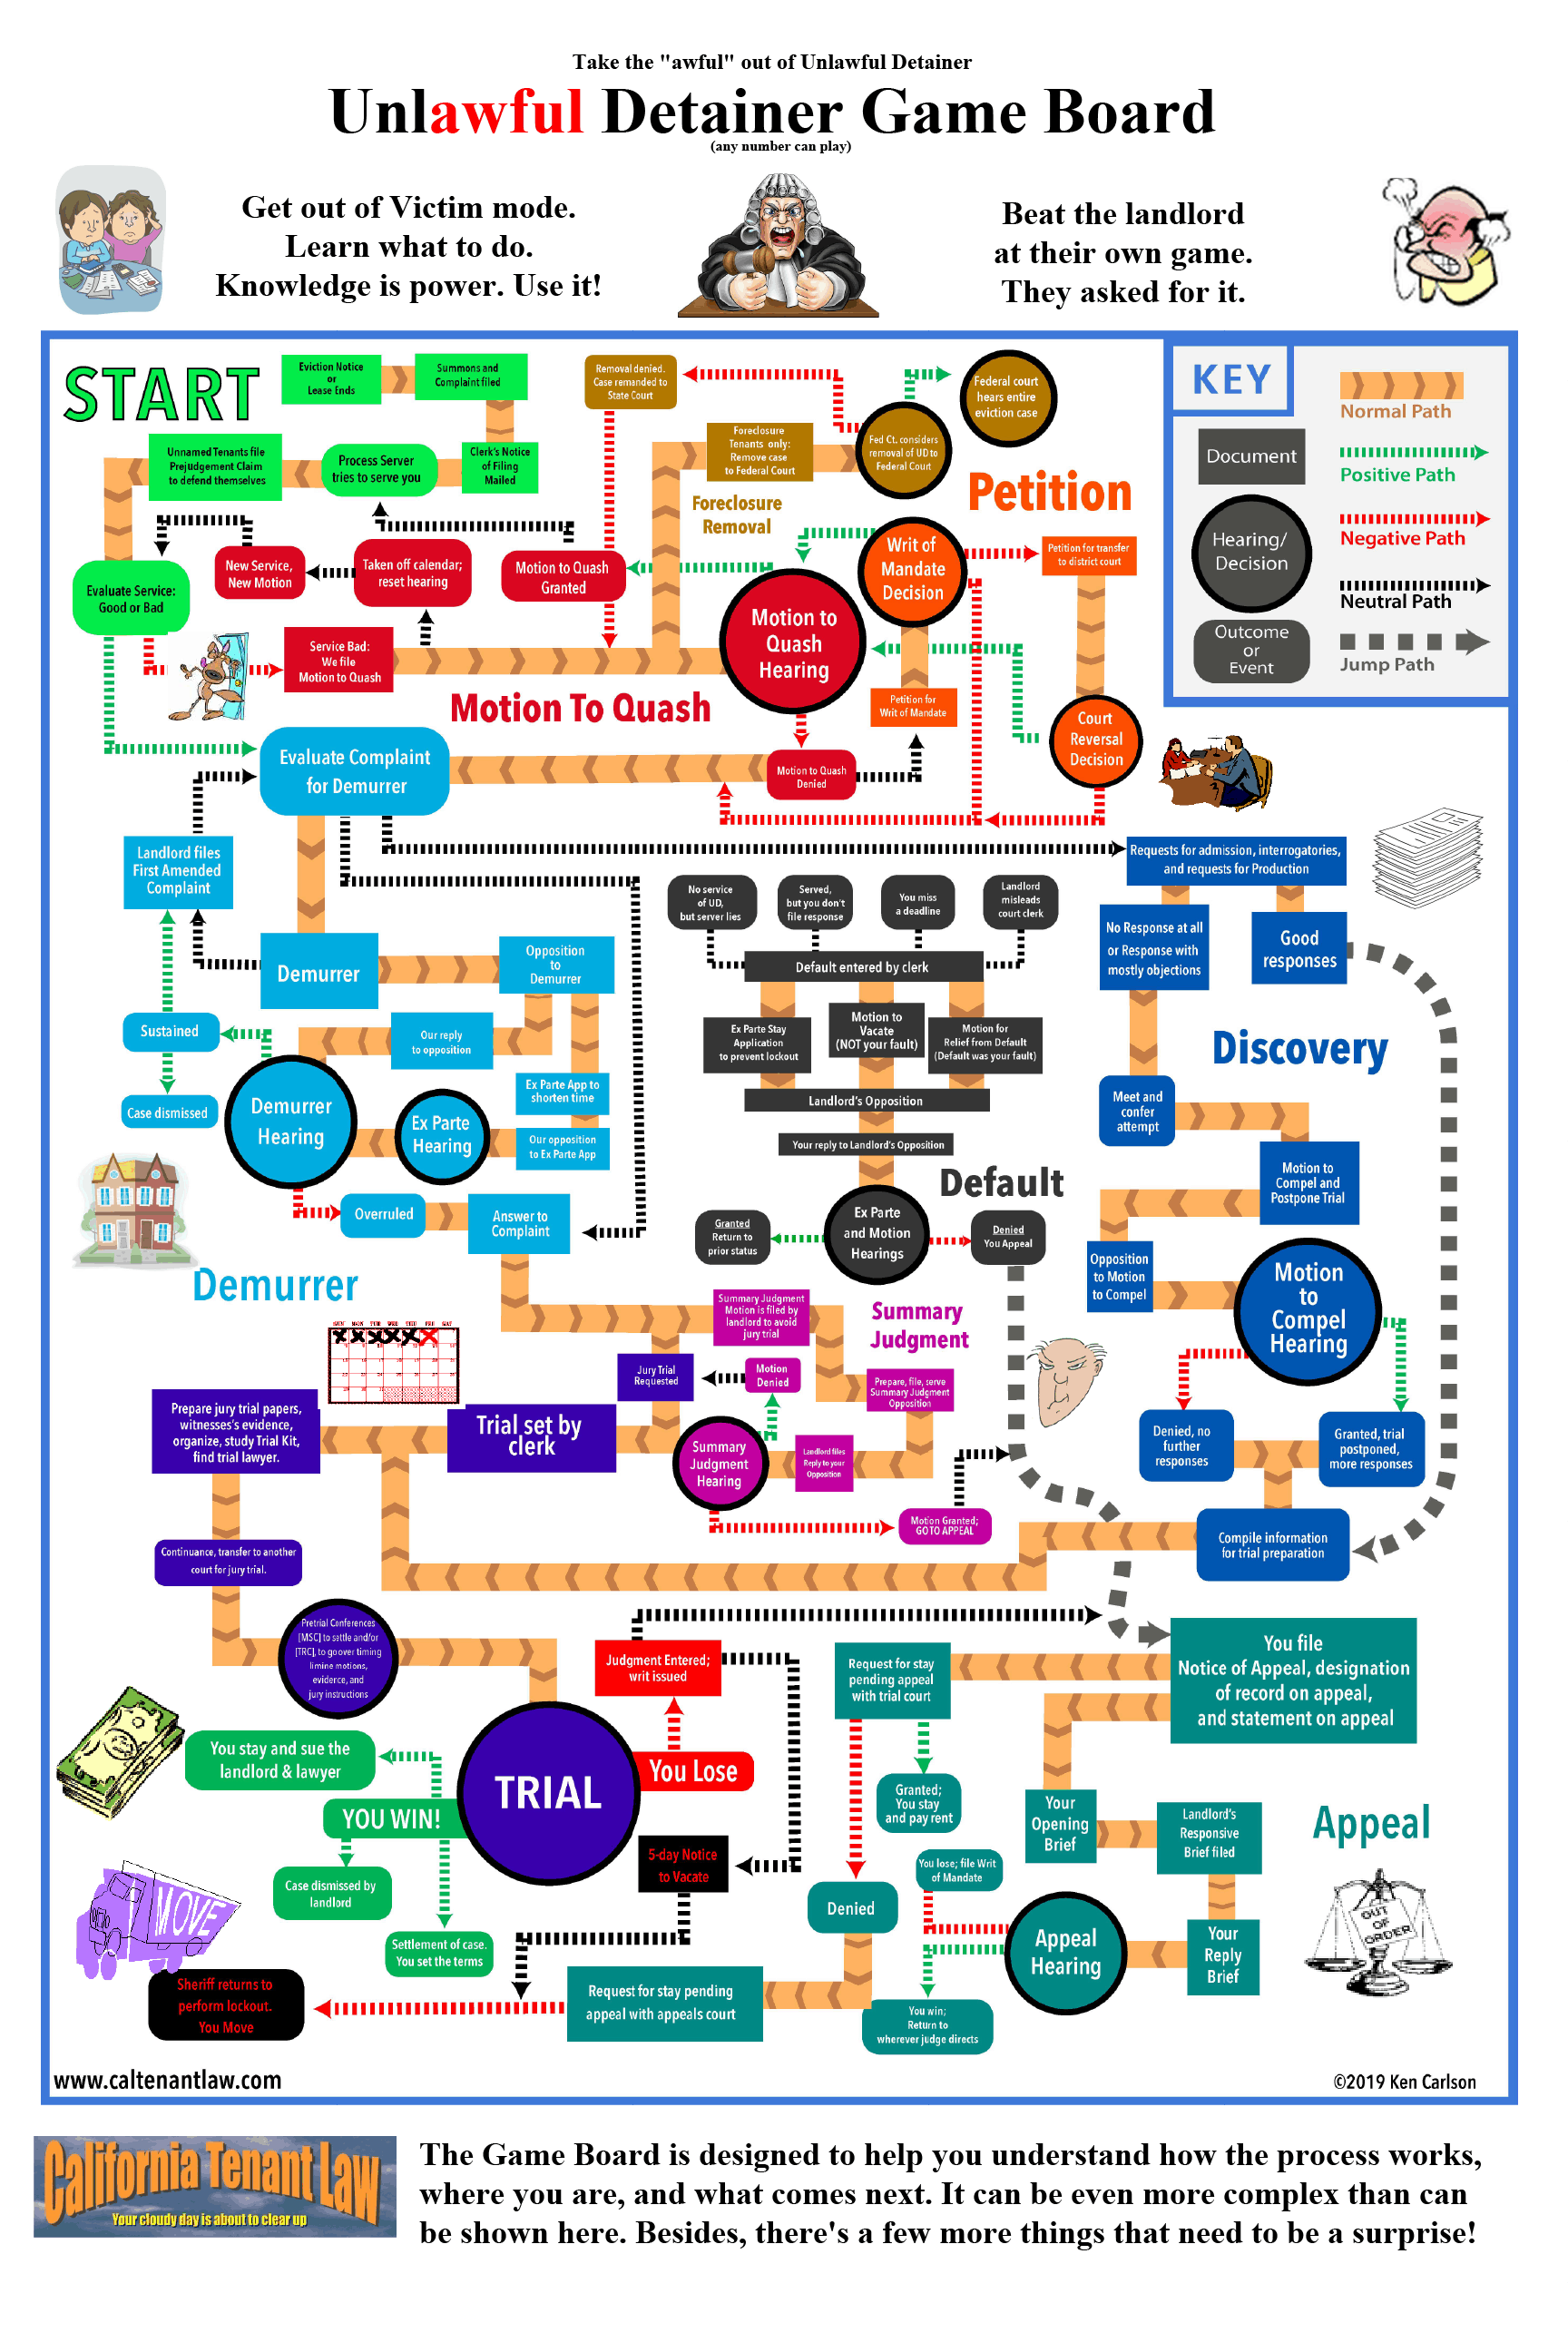 Eviction Flow Chart